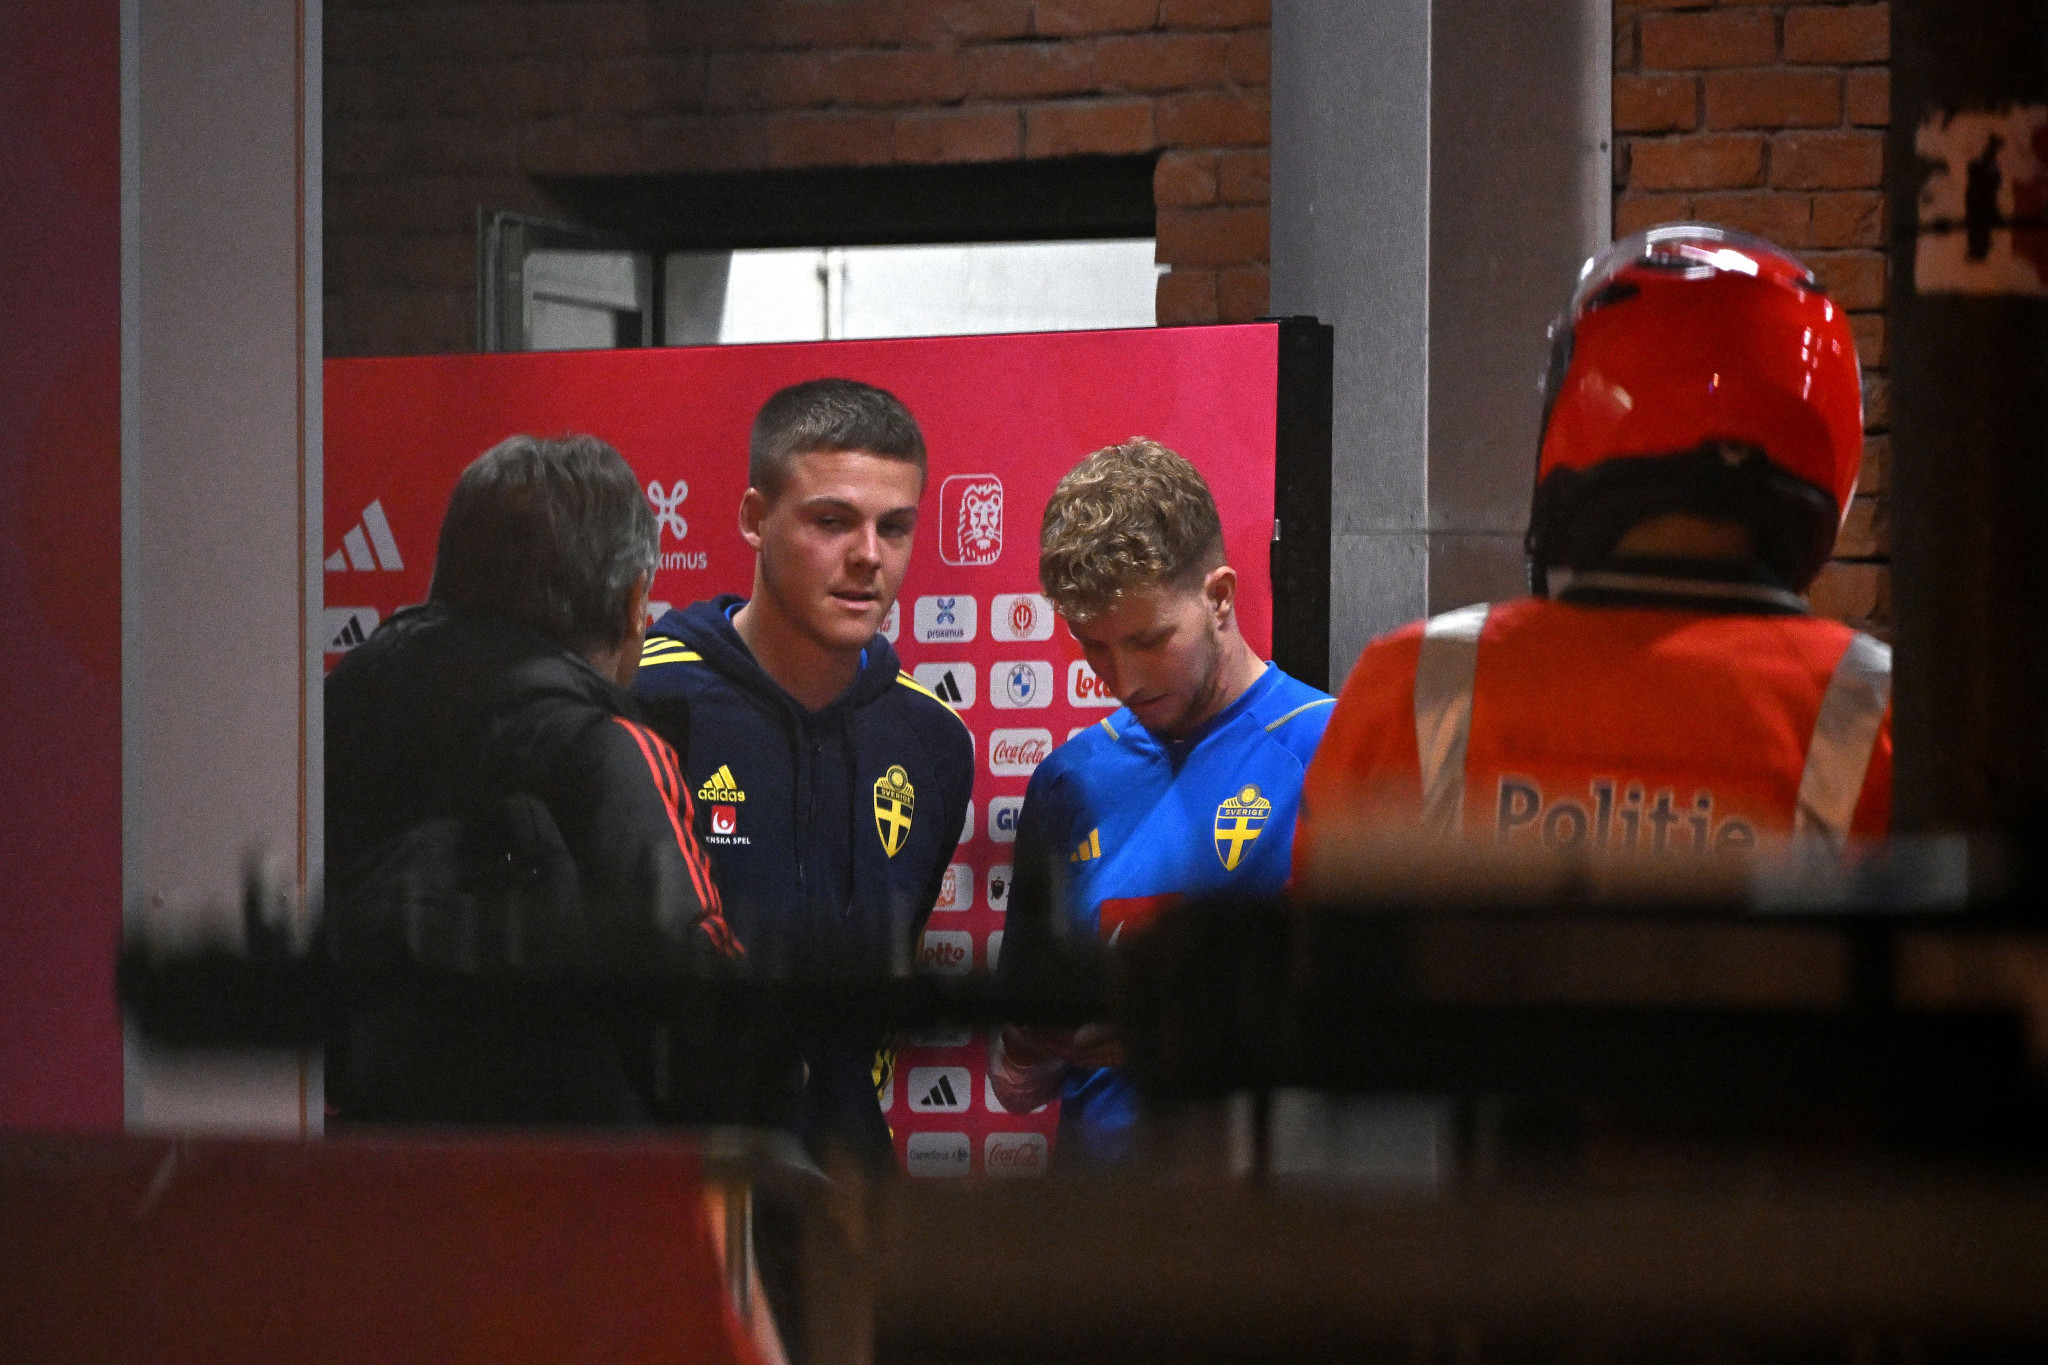 The Sweden team were taken to the airport under police escort after the abandonment of the match ©Getty Images